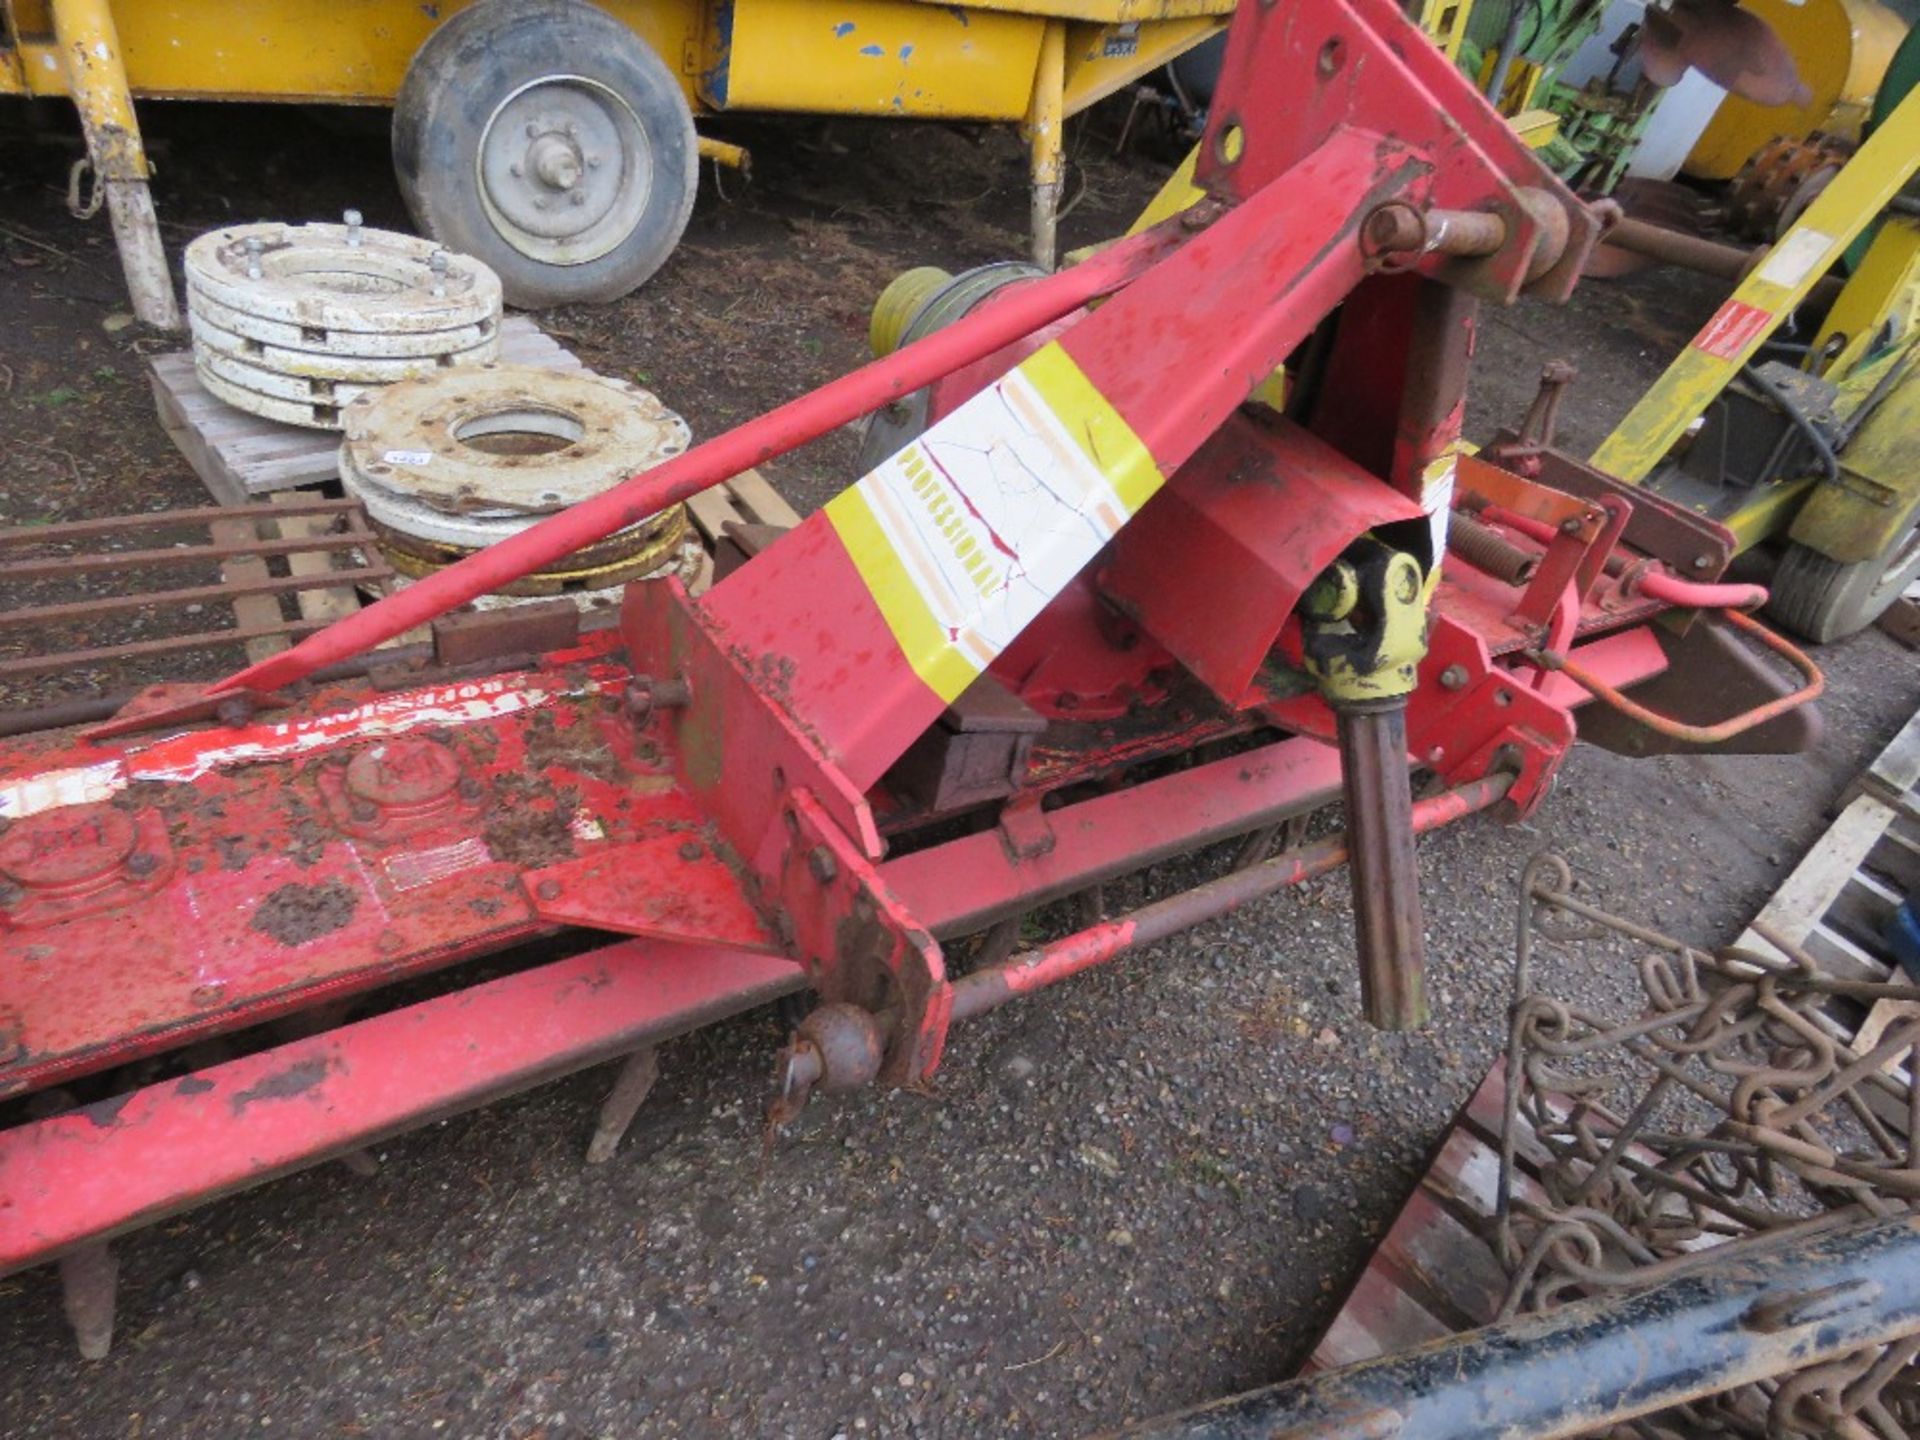 TRACTOR MOUNTED LELY ROTERRA POWER HARROW, 10FT WIDTH APPROX. DIRECT FROM LOCAL FARM.